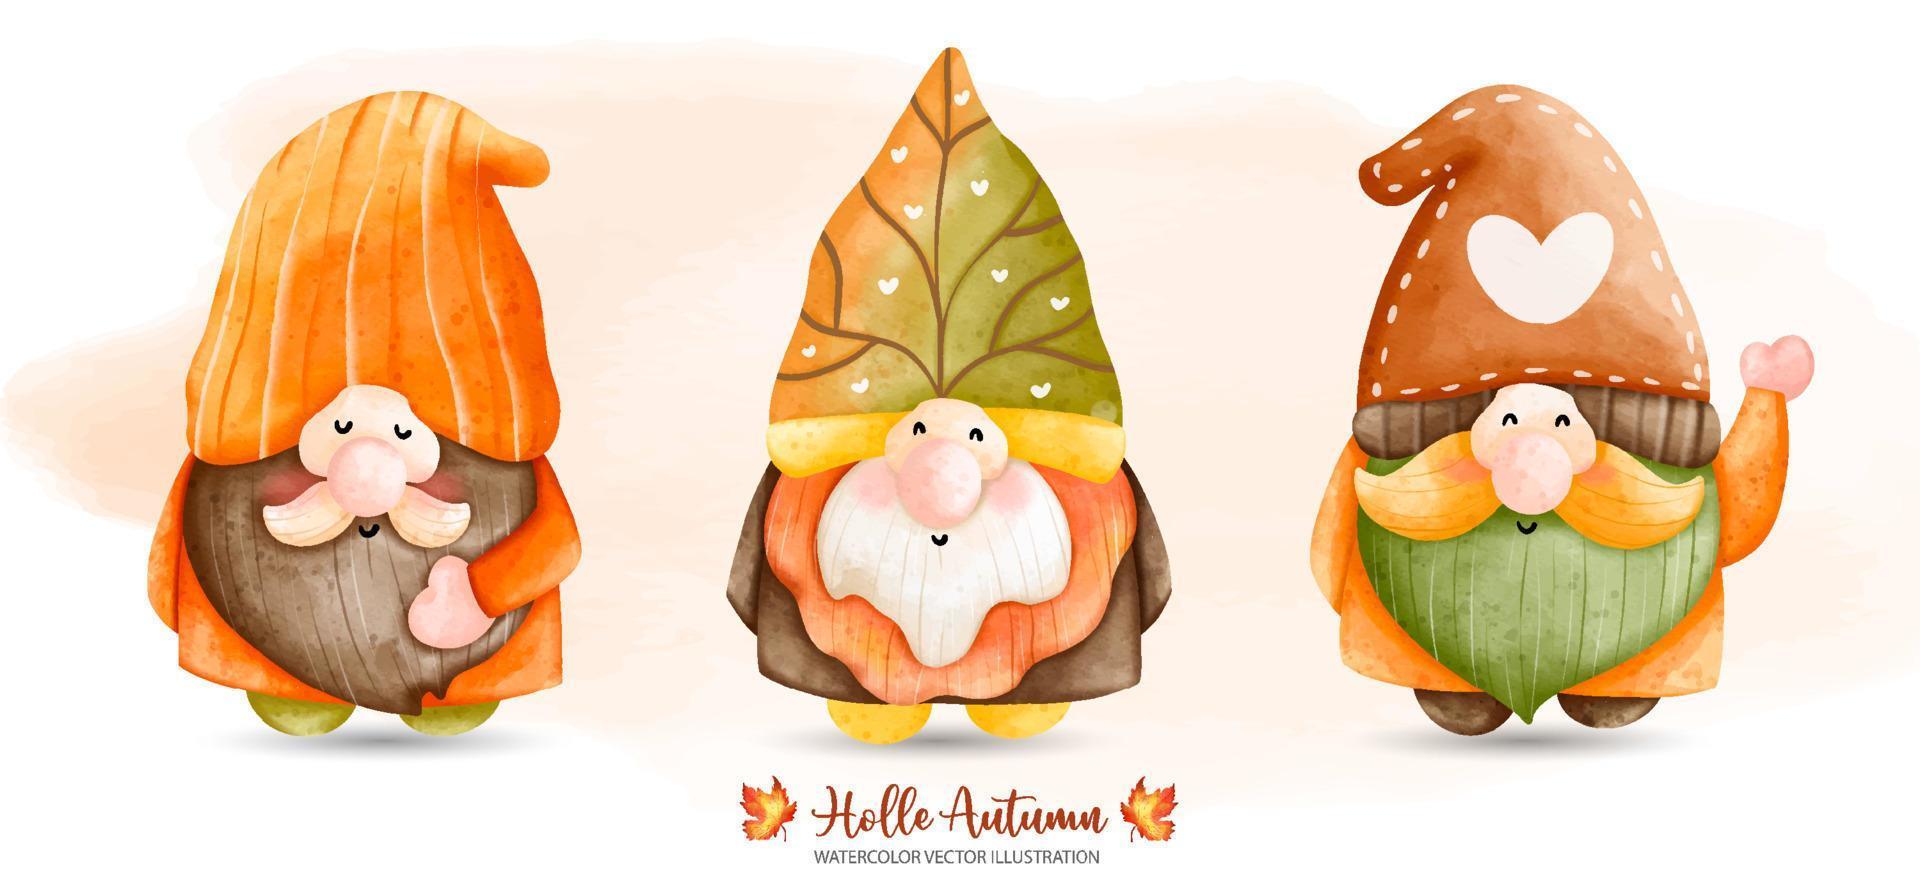 Fall Gnome, Autumn Gnome, Autumn or Fall Animal concept, Digital paint watercolor illustration vector